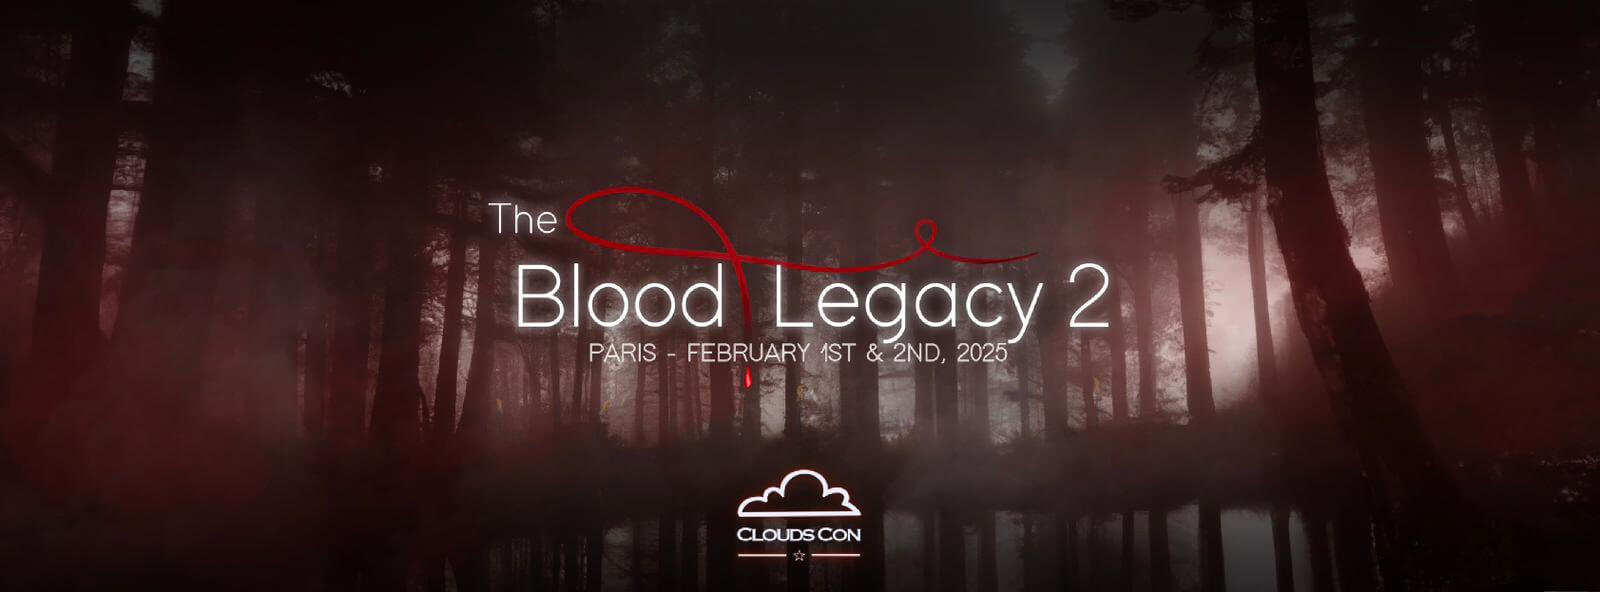 The Blood Legacy 2